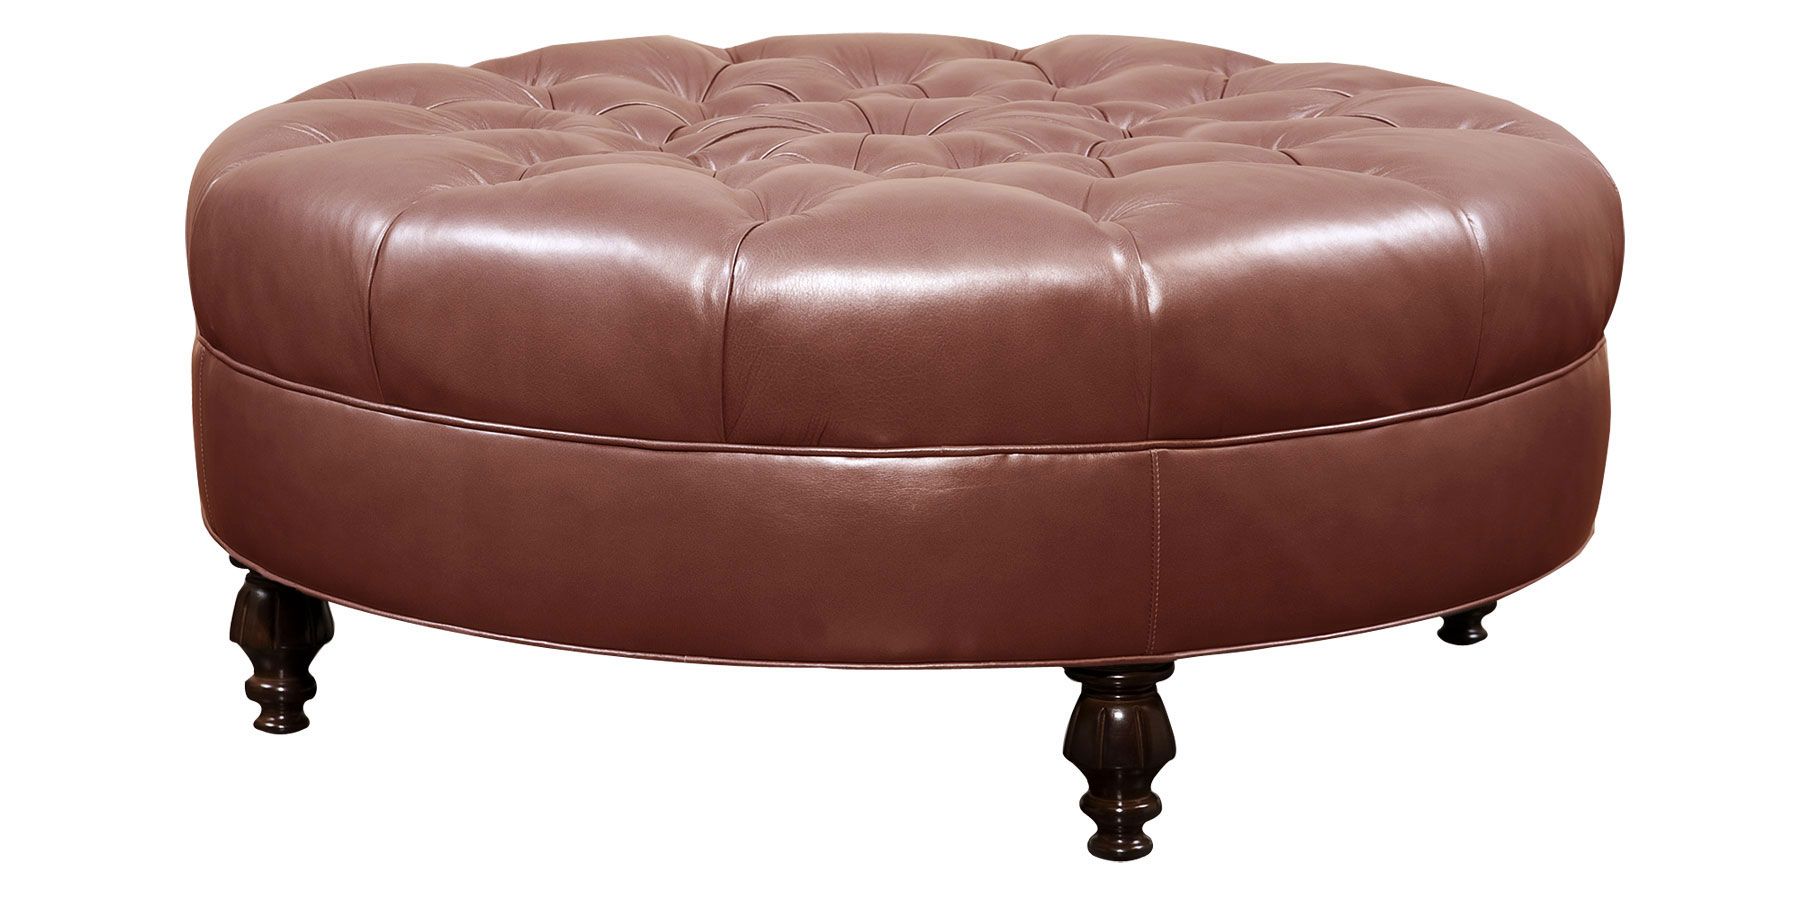 Leather Ottomans And Coffee Table Storage Round Upholstered Ottoman Coffee Table Ives Designer Style Leather Large Round Tufted Ottoman (View 4 of 10)